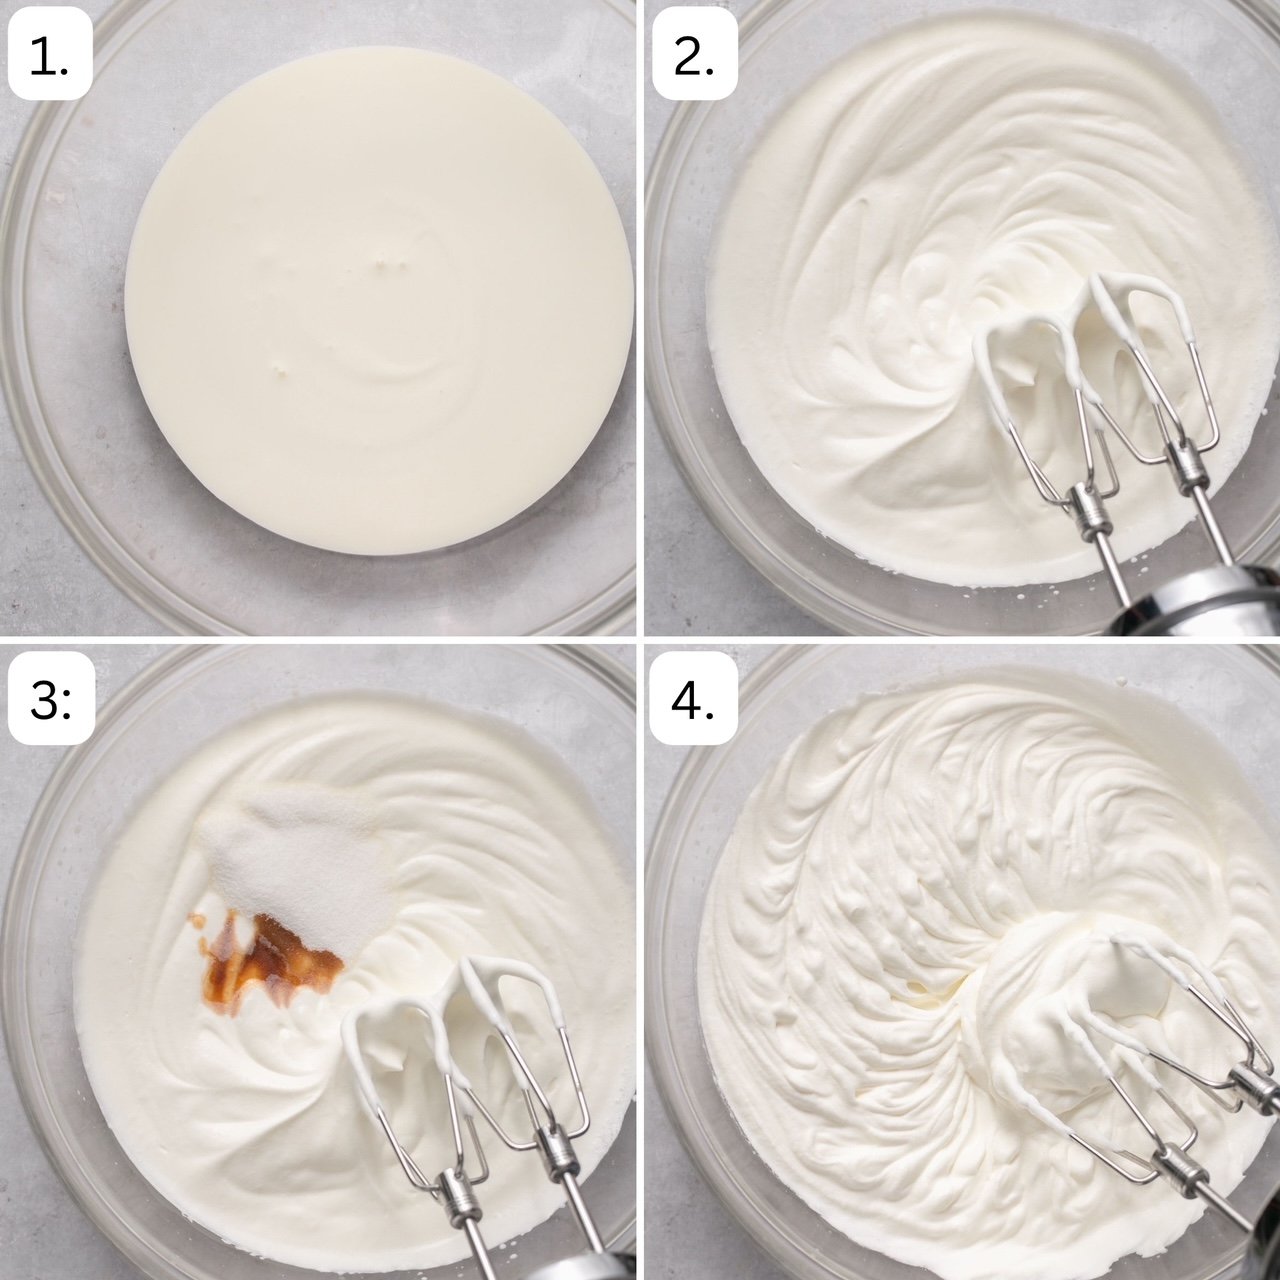 numbered step by step photos showing how to make homemade whipped cream. 